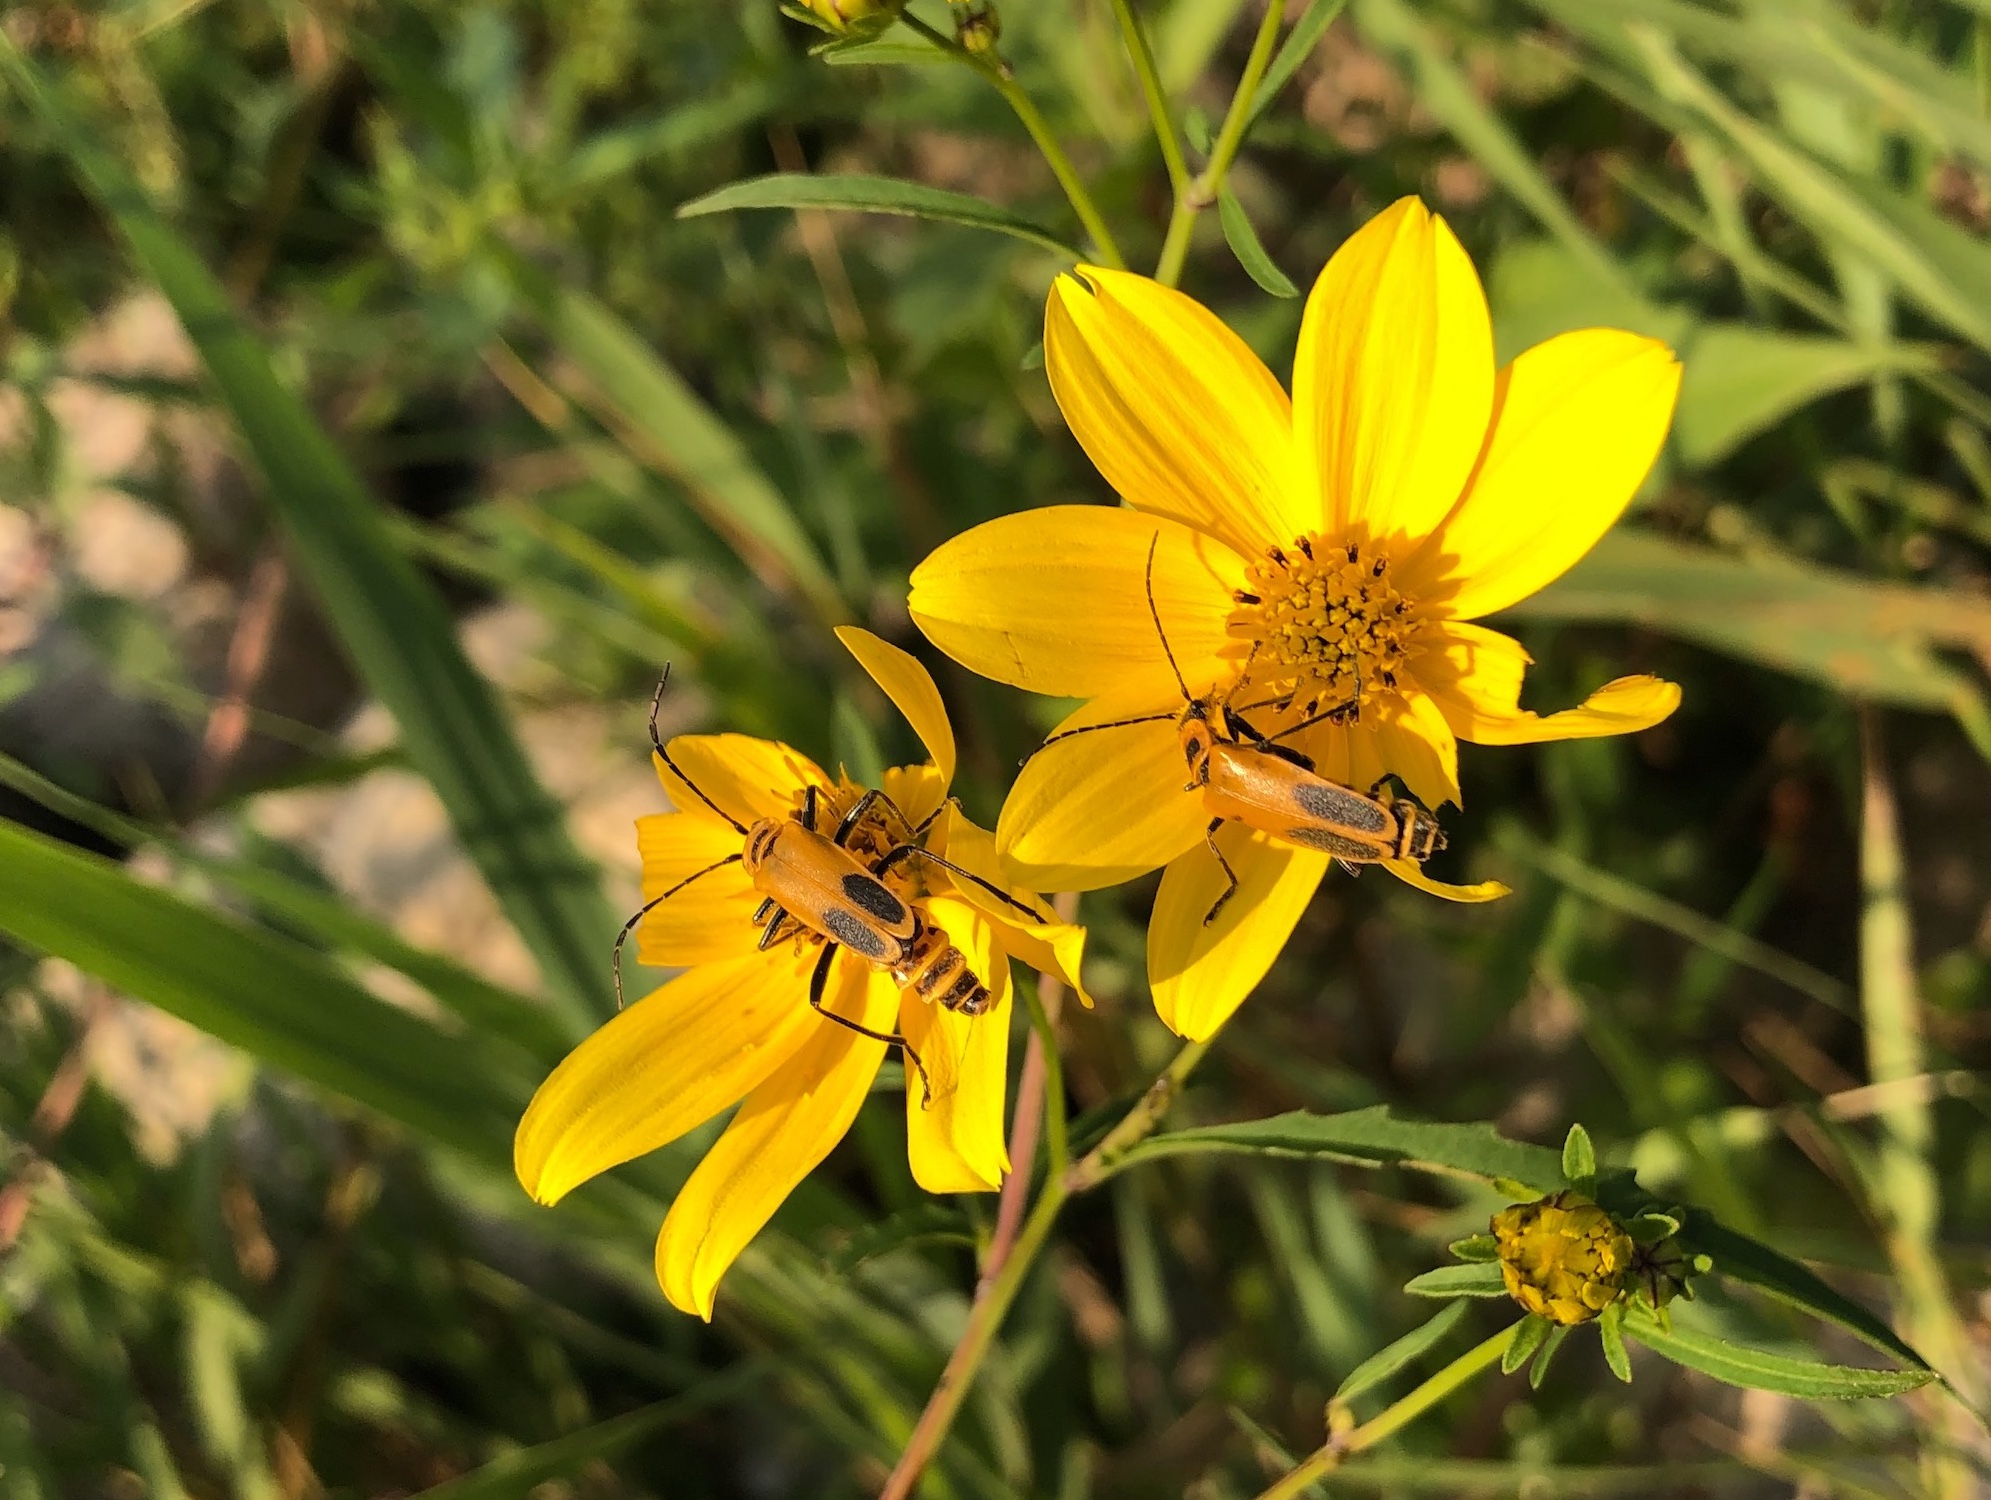 Goldenrod Soldier Beetles on Crowned Beggarticks on the shore of Lake Wingra on August 27, 2020.